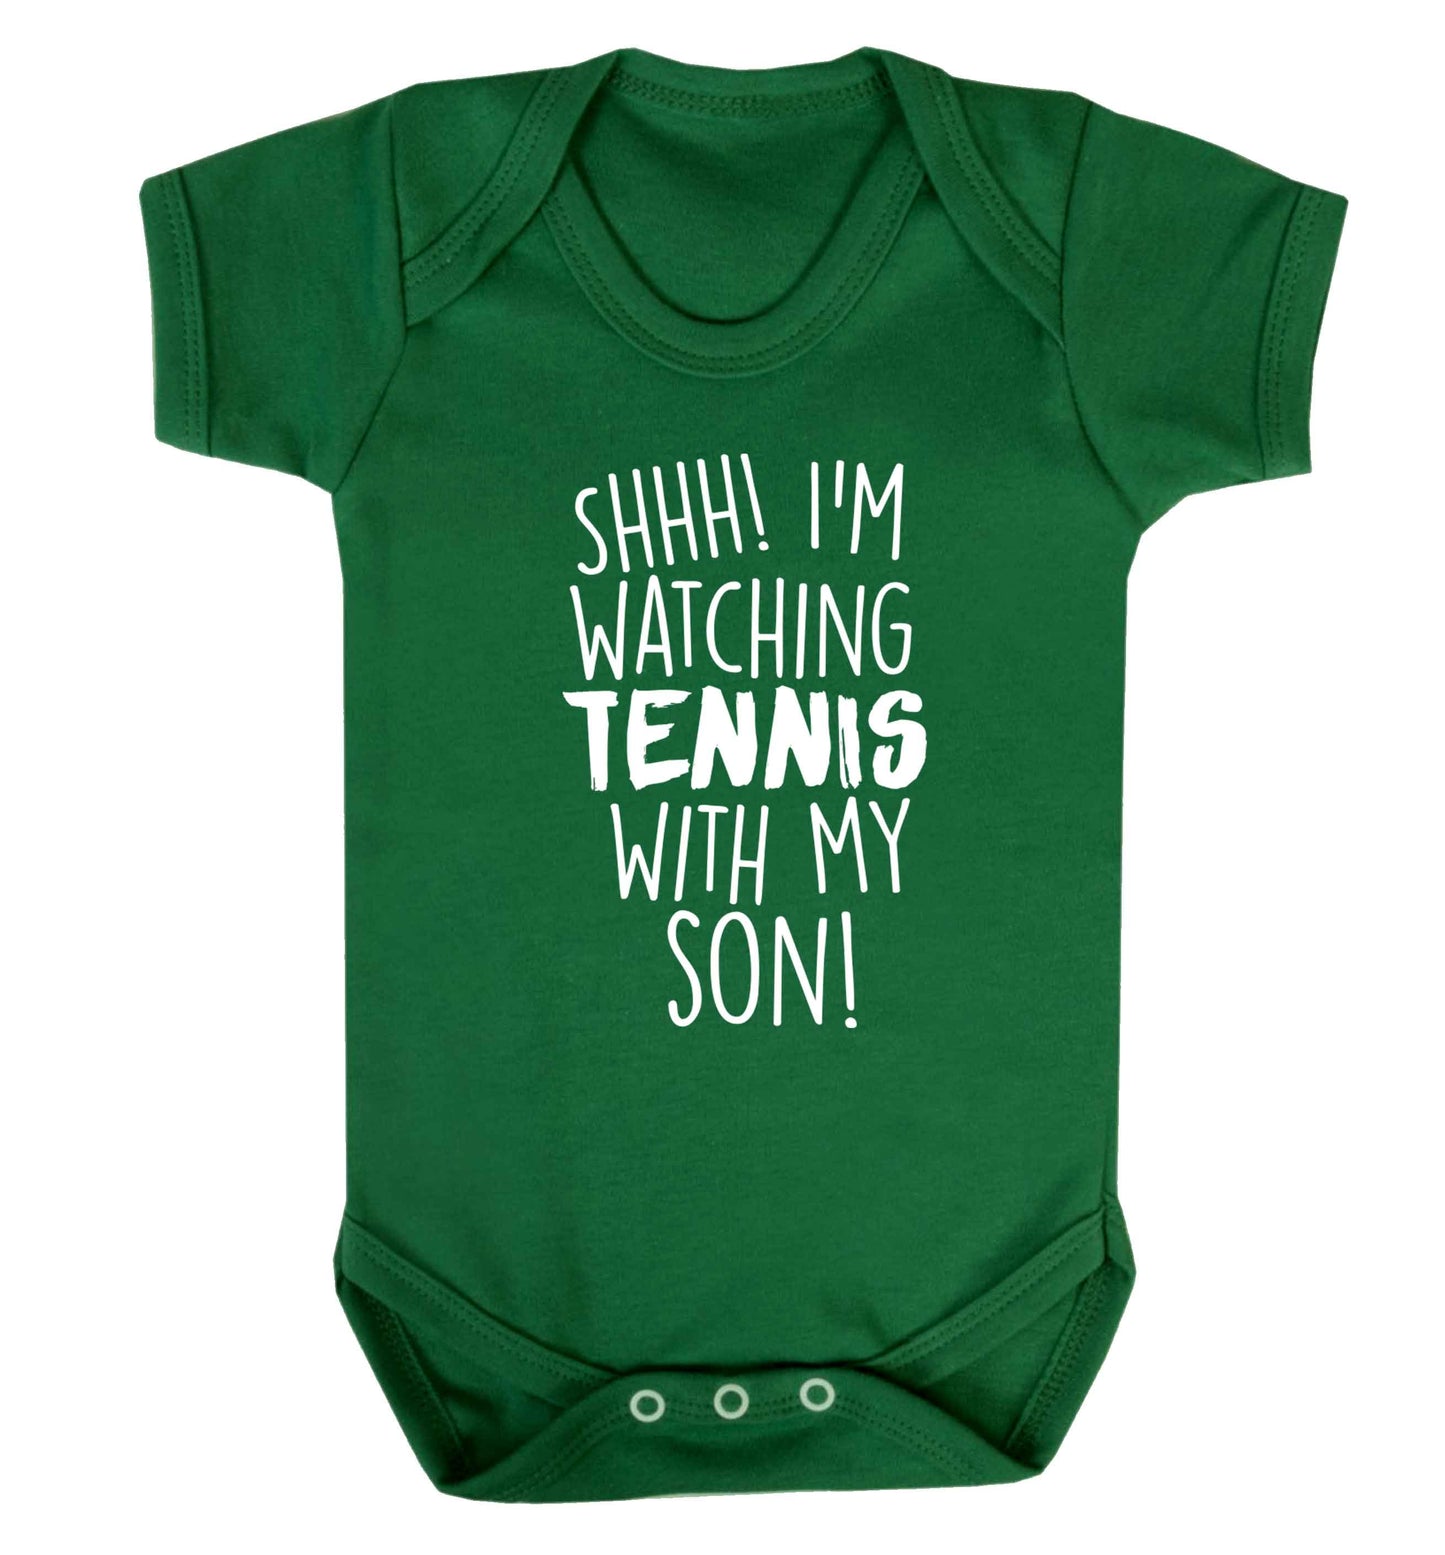 Shh! I'm watching tennis with my son! Baby Vest green 18-24 months